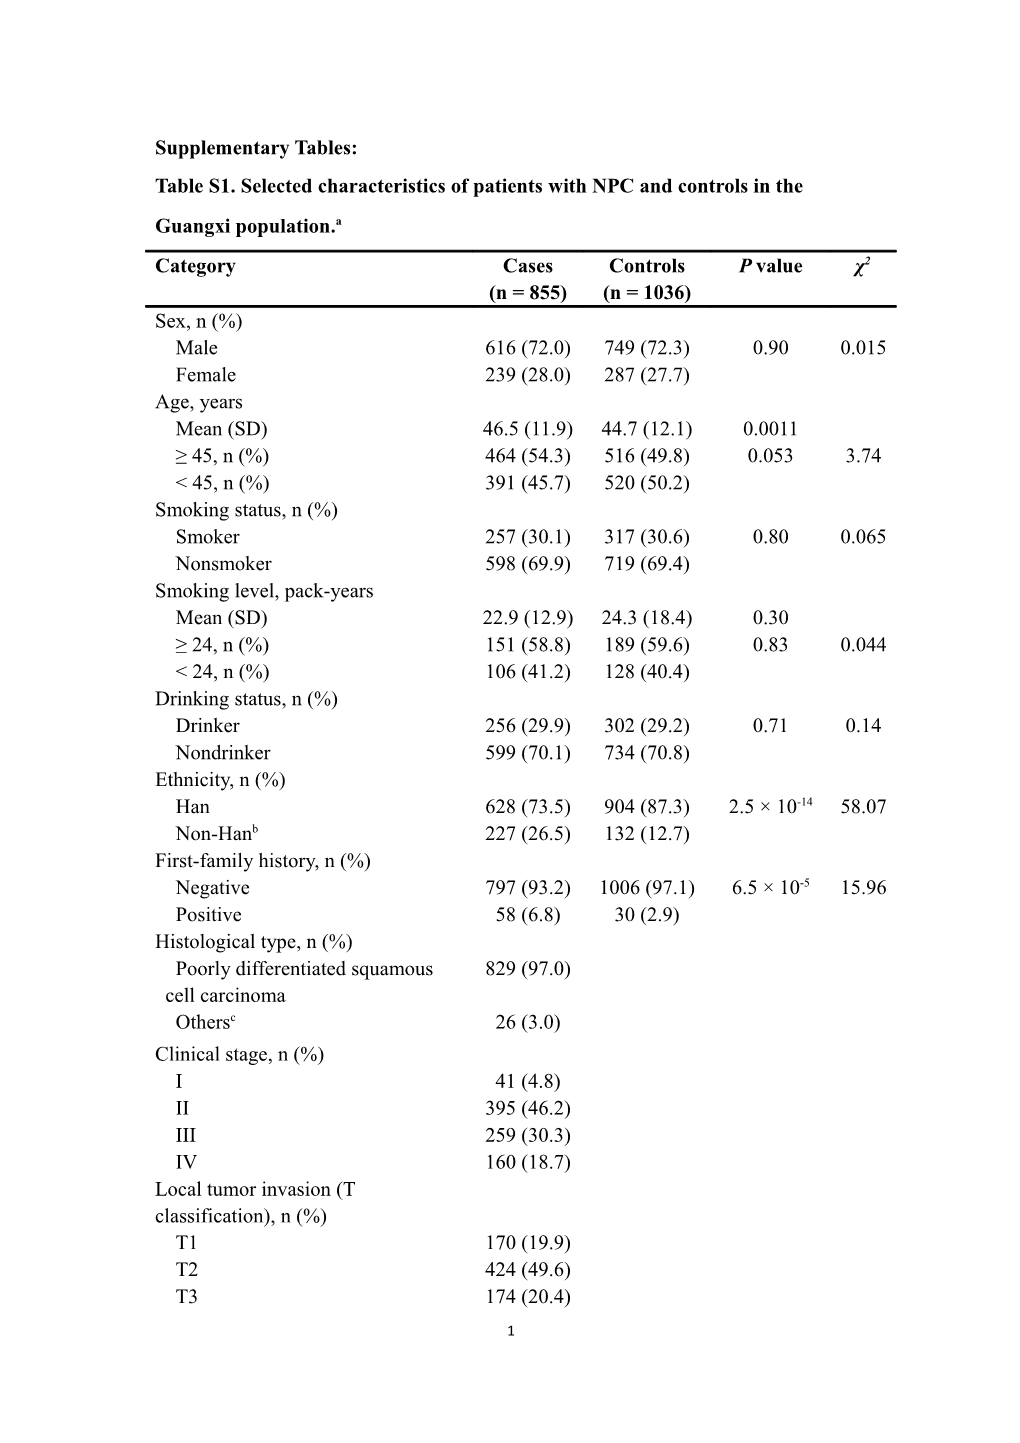 Table S1. Selected Characteristics of Patients with NPC and Controls in the Guangxi